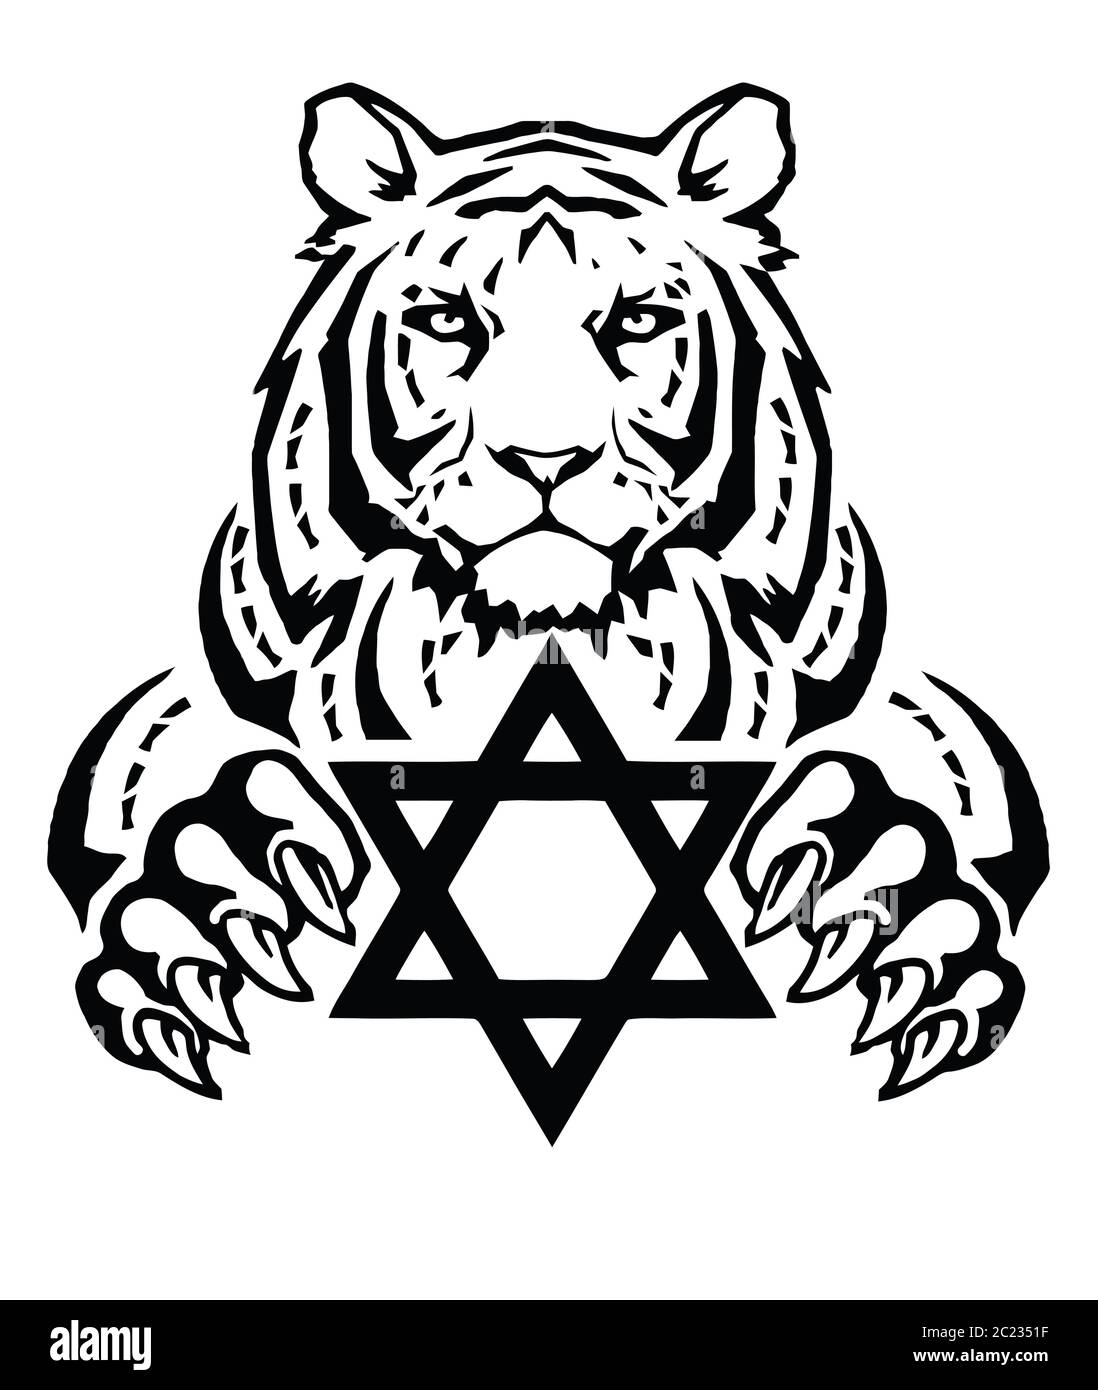 The Tiger and the symbol of Judaism - star of David, Megan David, drawing for tattoo, on a white background, vector Stock Vector